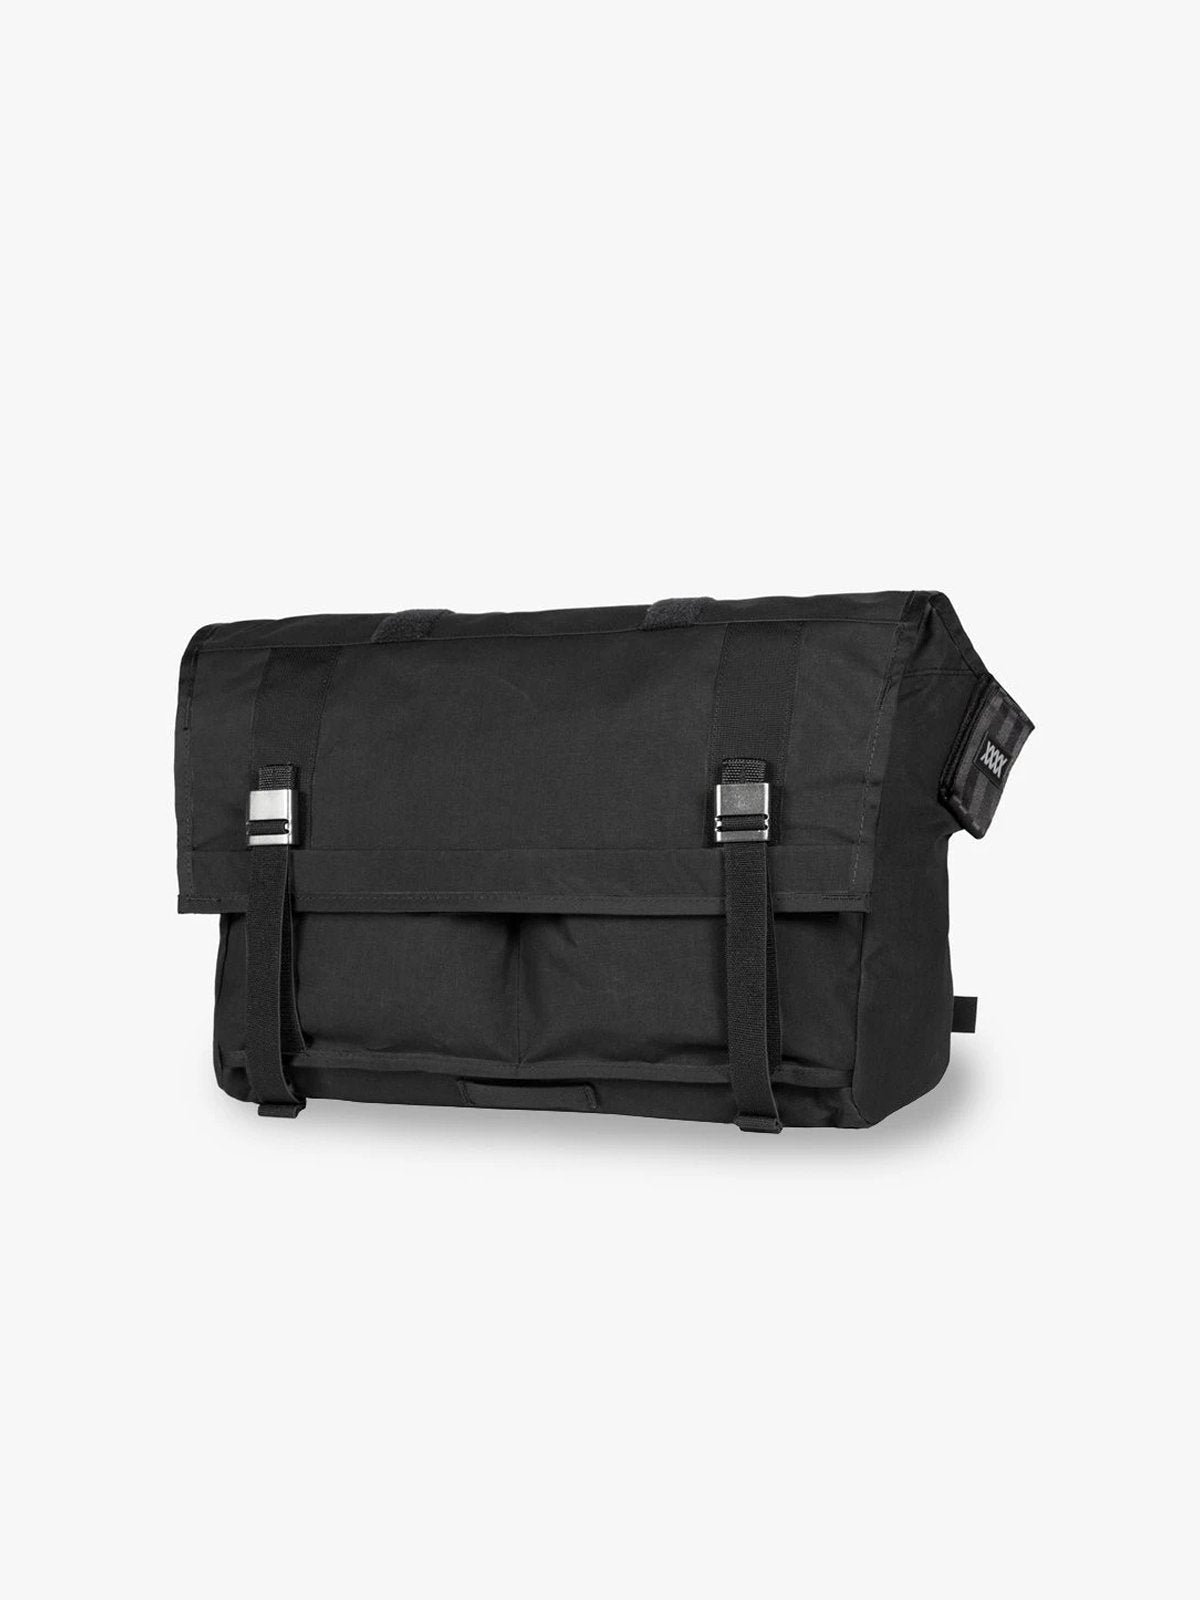 Rummy : AP by Mission Workshop - Weatherproof Bags & Technical Apparel - San Francisco & Los Angeles - Built to endure - Guaranteed forever